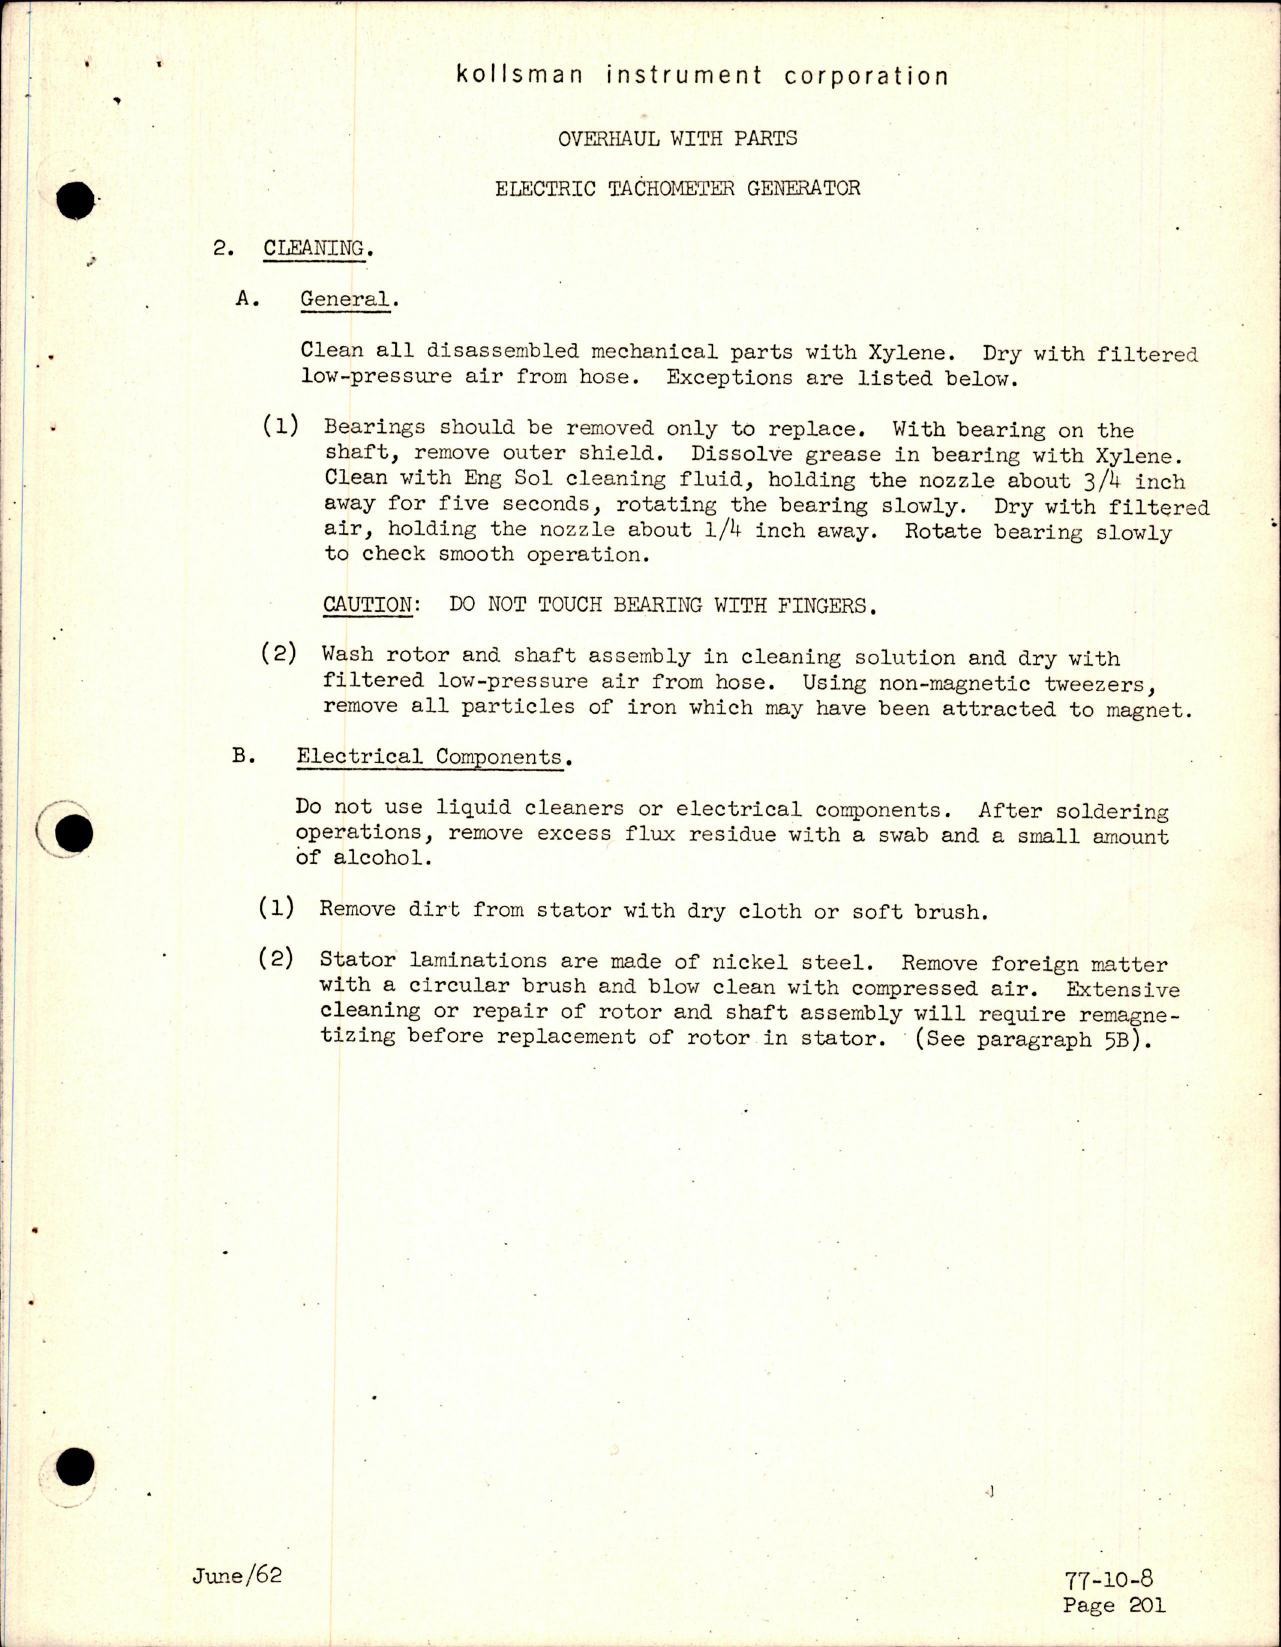 Sample page 9 from AirCorps Library document: Overhaul Instructions with Parts for Electric Tachometer Generator - Parts A28071 11 302 and C28071 11 302